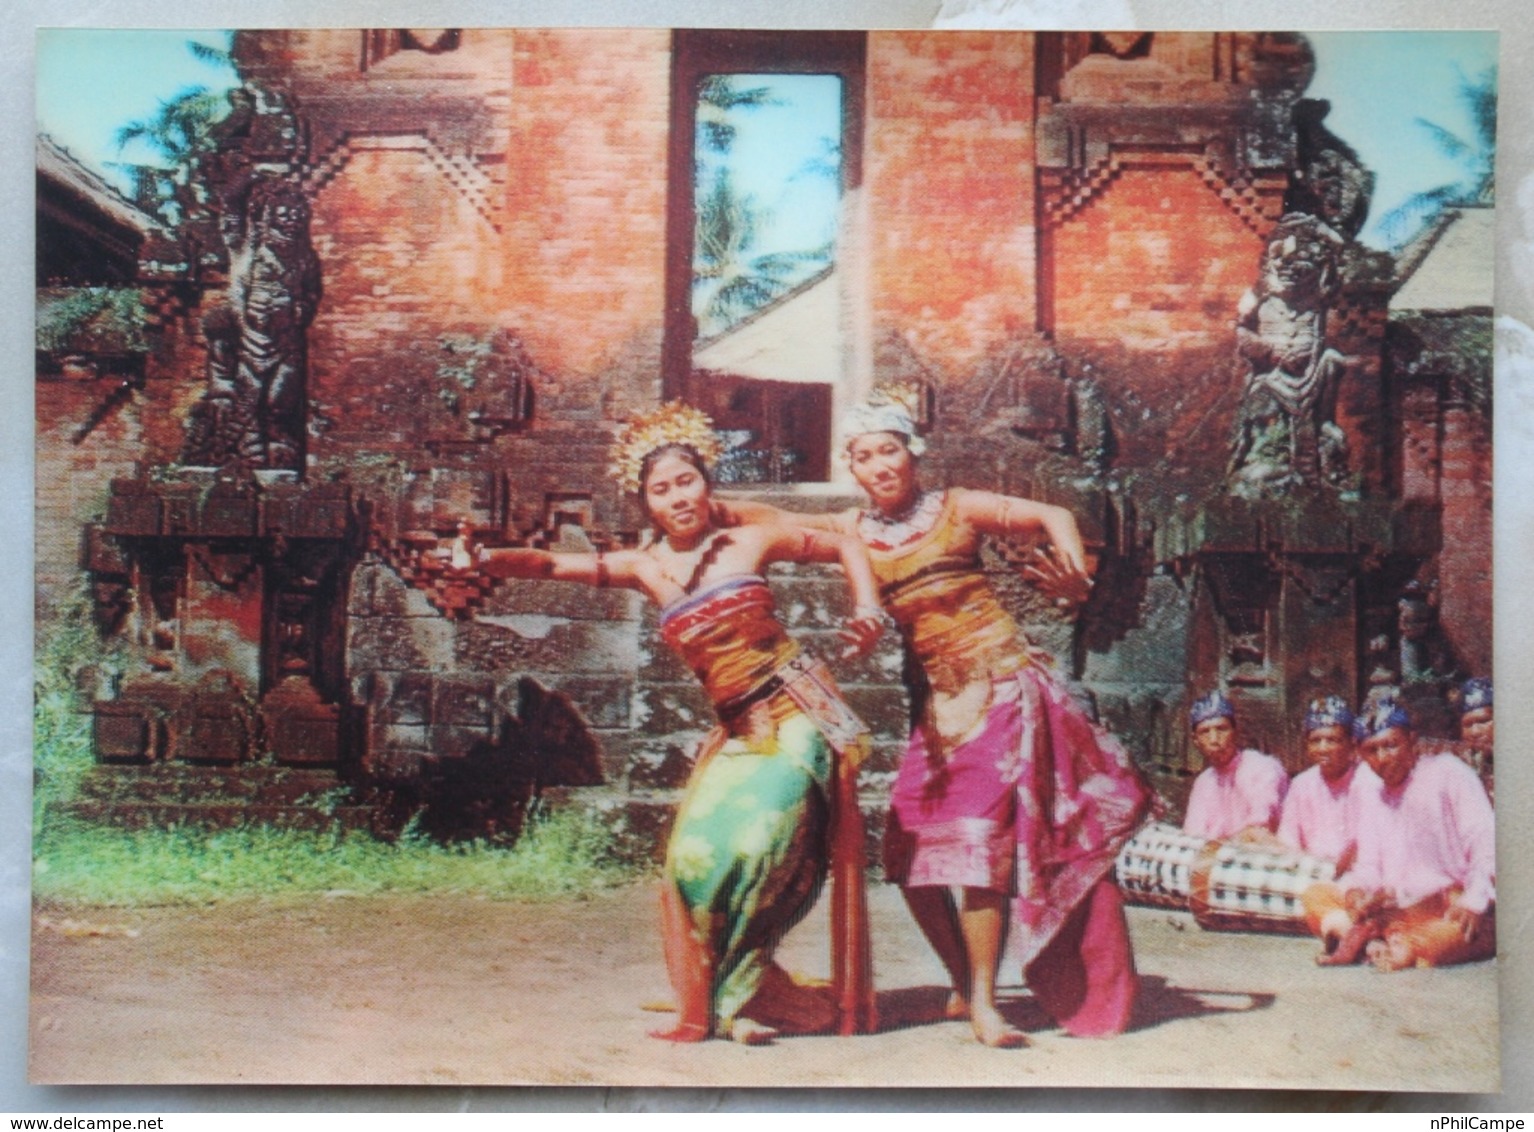 #9-INDONESIA POSTCARD 1970s 3D CARD(TOP STEREO), THE PENDET DANCE, BALI - Indonesia